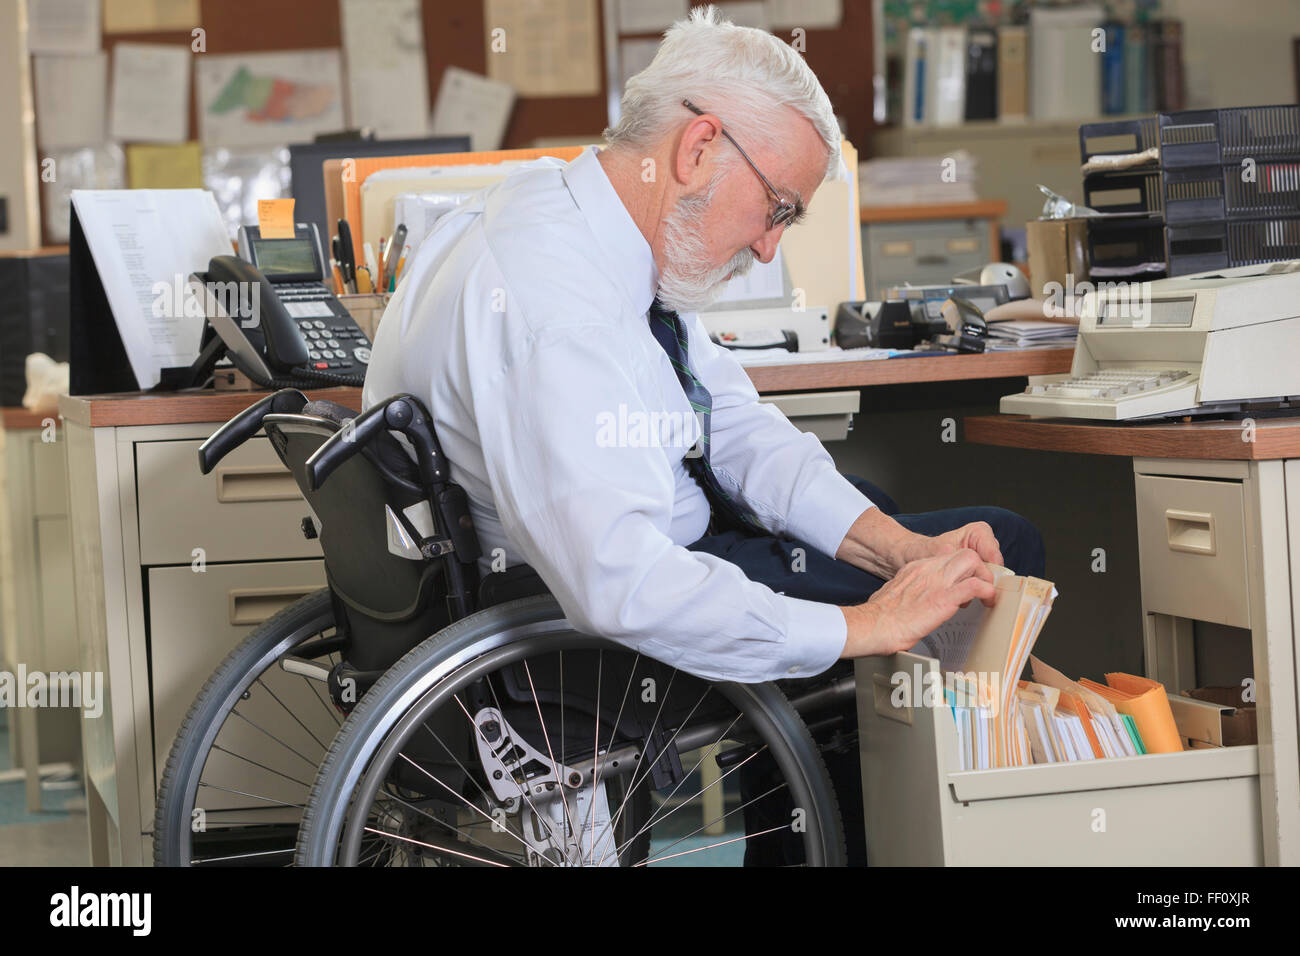 Caucasian businessman filing papers in office Stock Photo